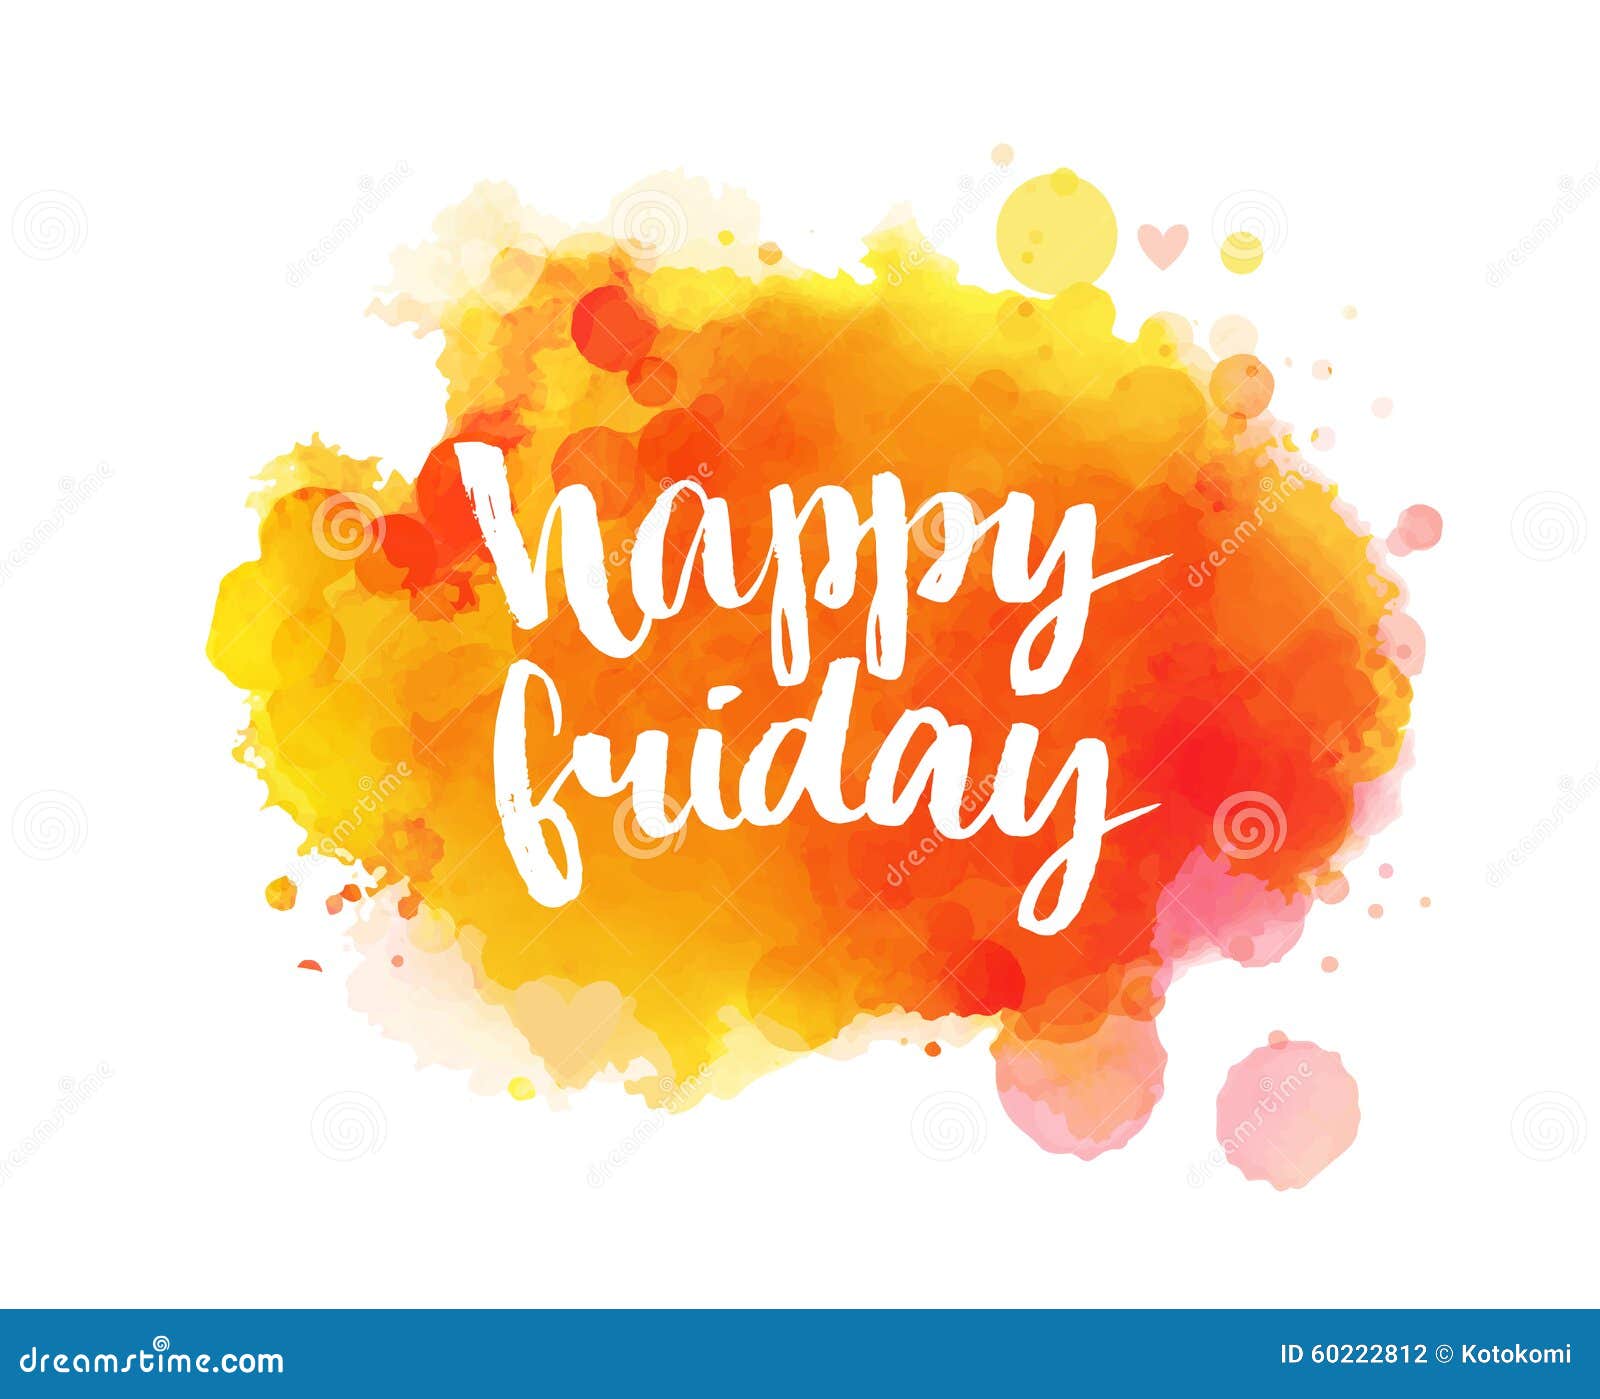 Happy Friday. Inspirational Quote, Artistic Vector Stock Vector ...